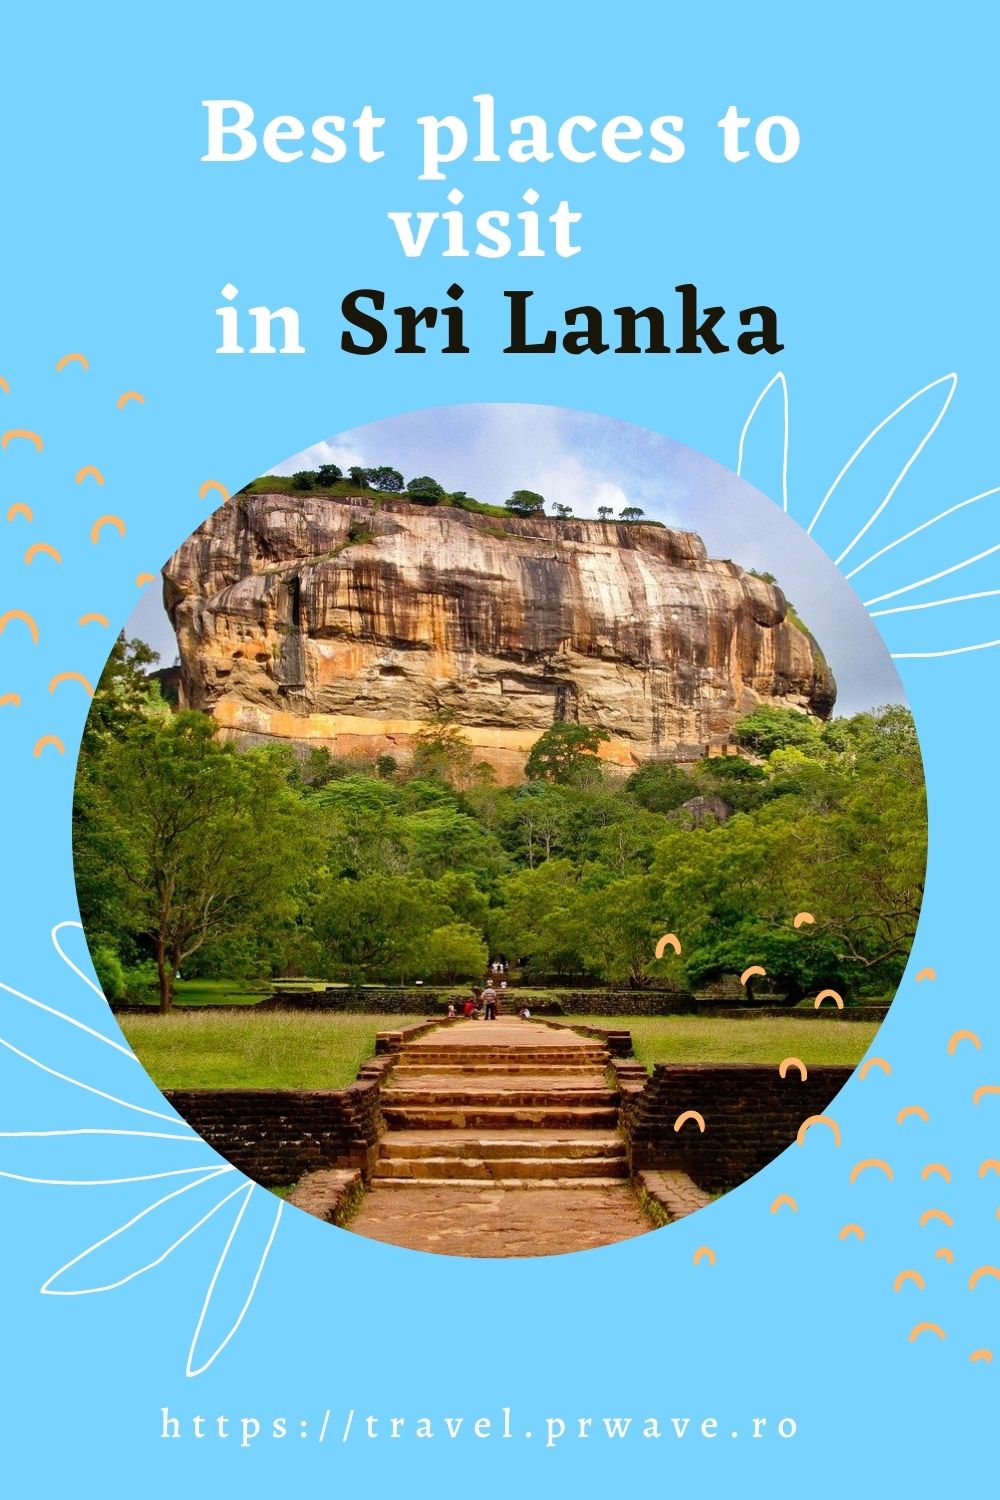 The best places to visit in Sri Lanka. Discover the top Sri Lankan attractions from this article. Where to go in Sri Lanka if you are visiting Sri Lanka for the first time. #srilanka #travelmomentsintime #srilankathingstodo #asiatravel 